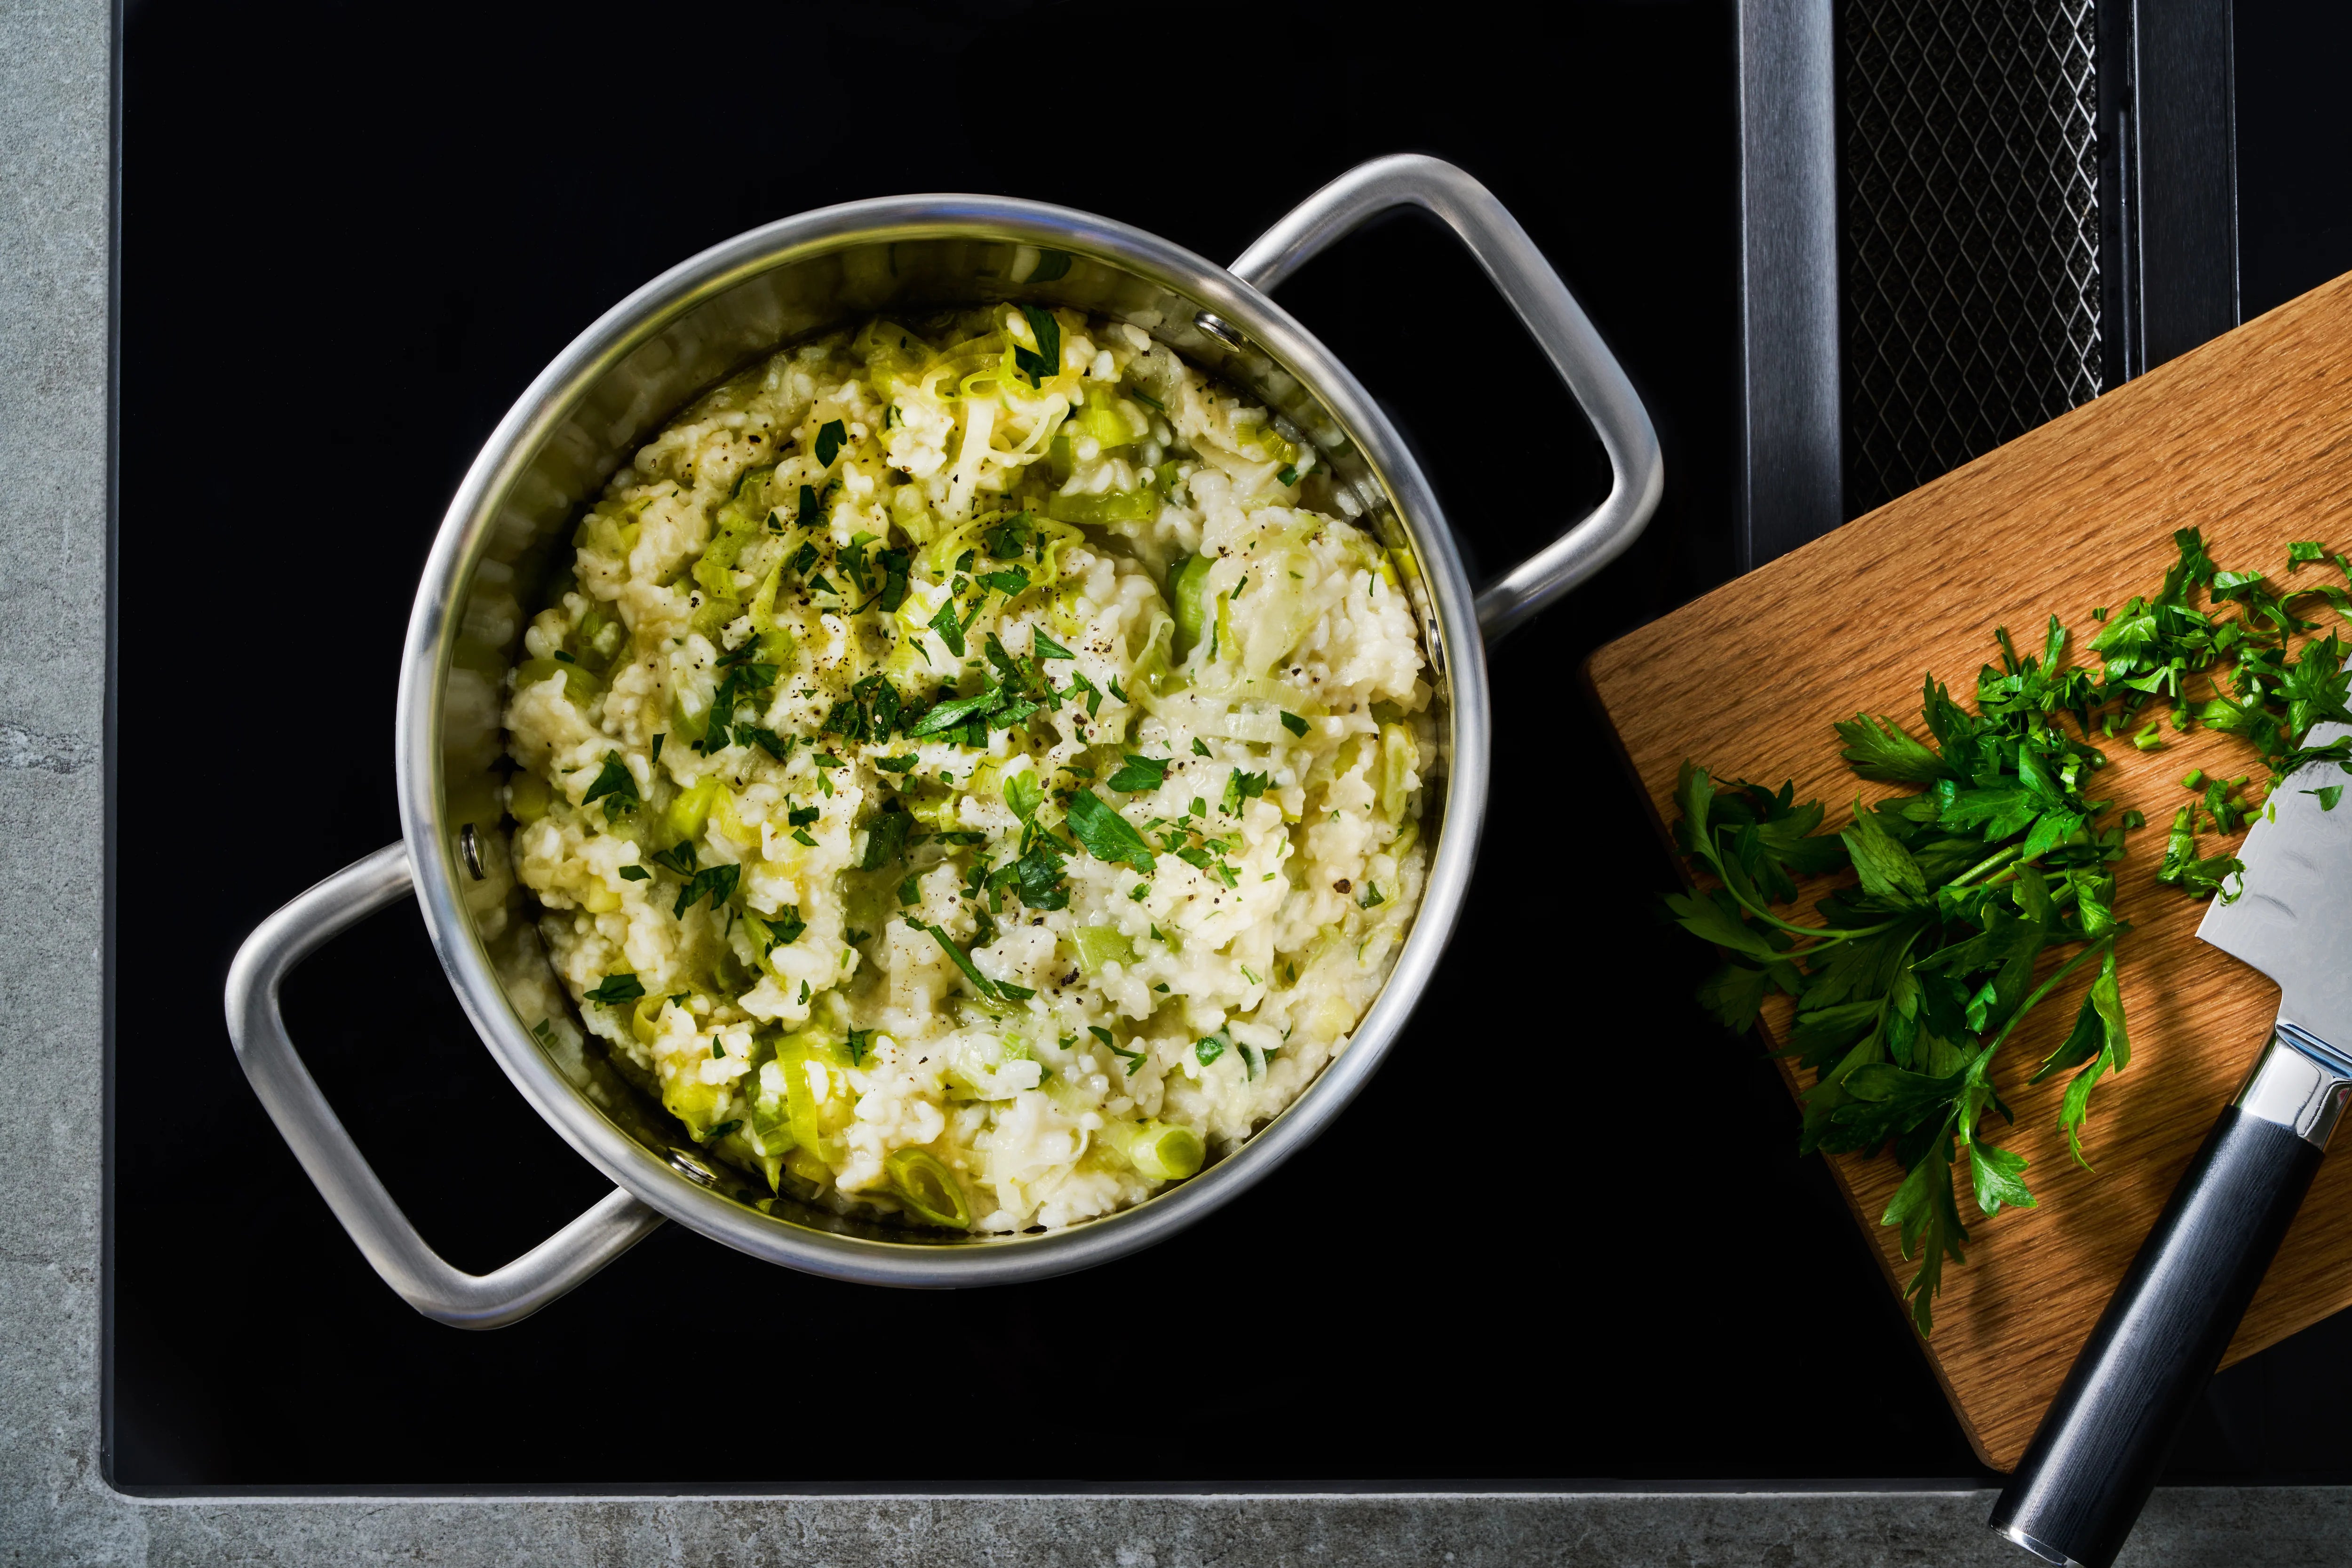 Risotto with leek, parsley, and parmesan